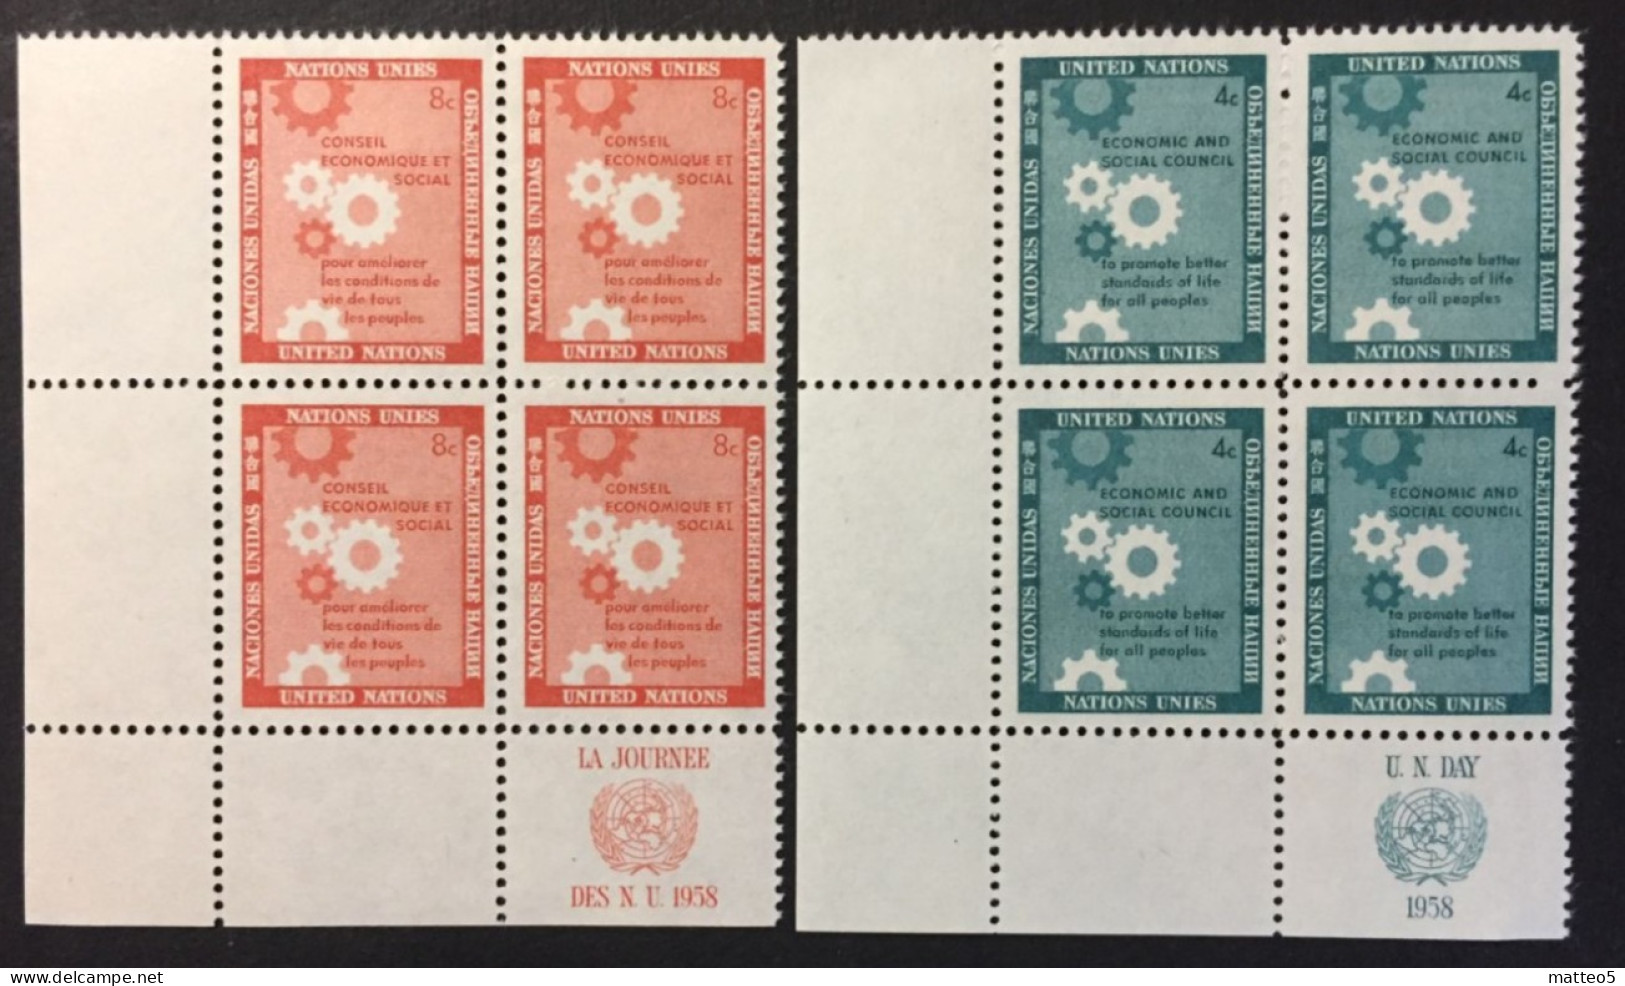 1958 - United Nations UNO UN ONU - Economic  And Social Council, Gearwheels - 2x4 Stamps   Unused - Nuovi